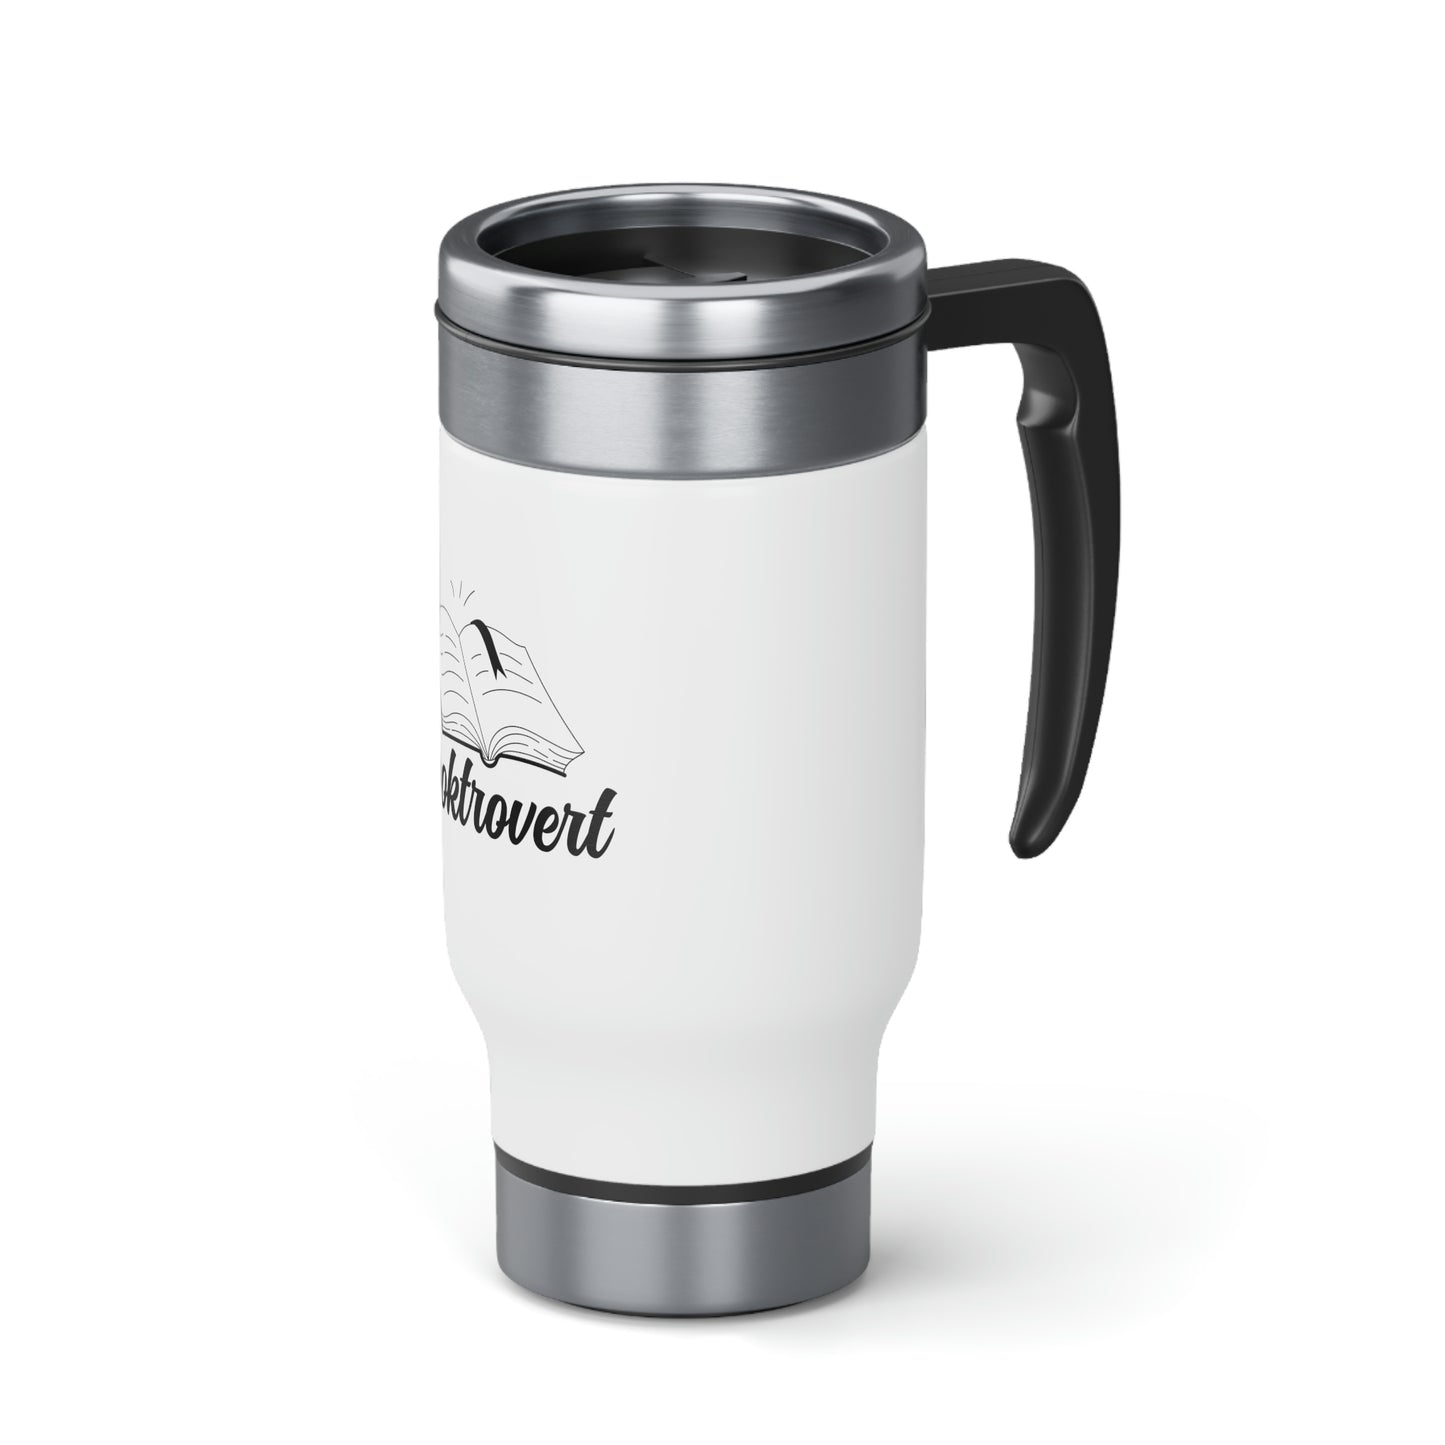 "Booktrovert" Stainless Steel Travel Mug with Handle, 14oz